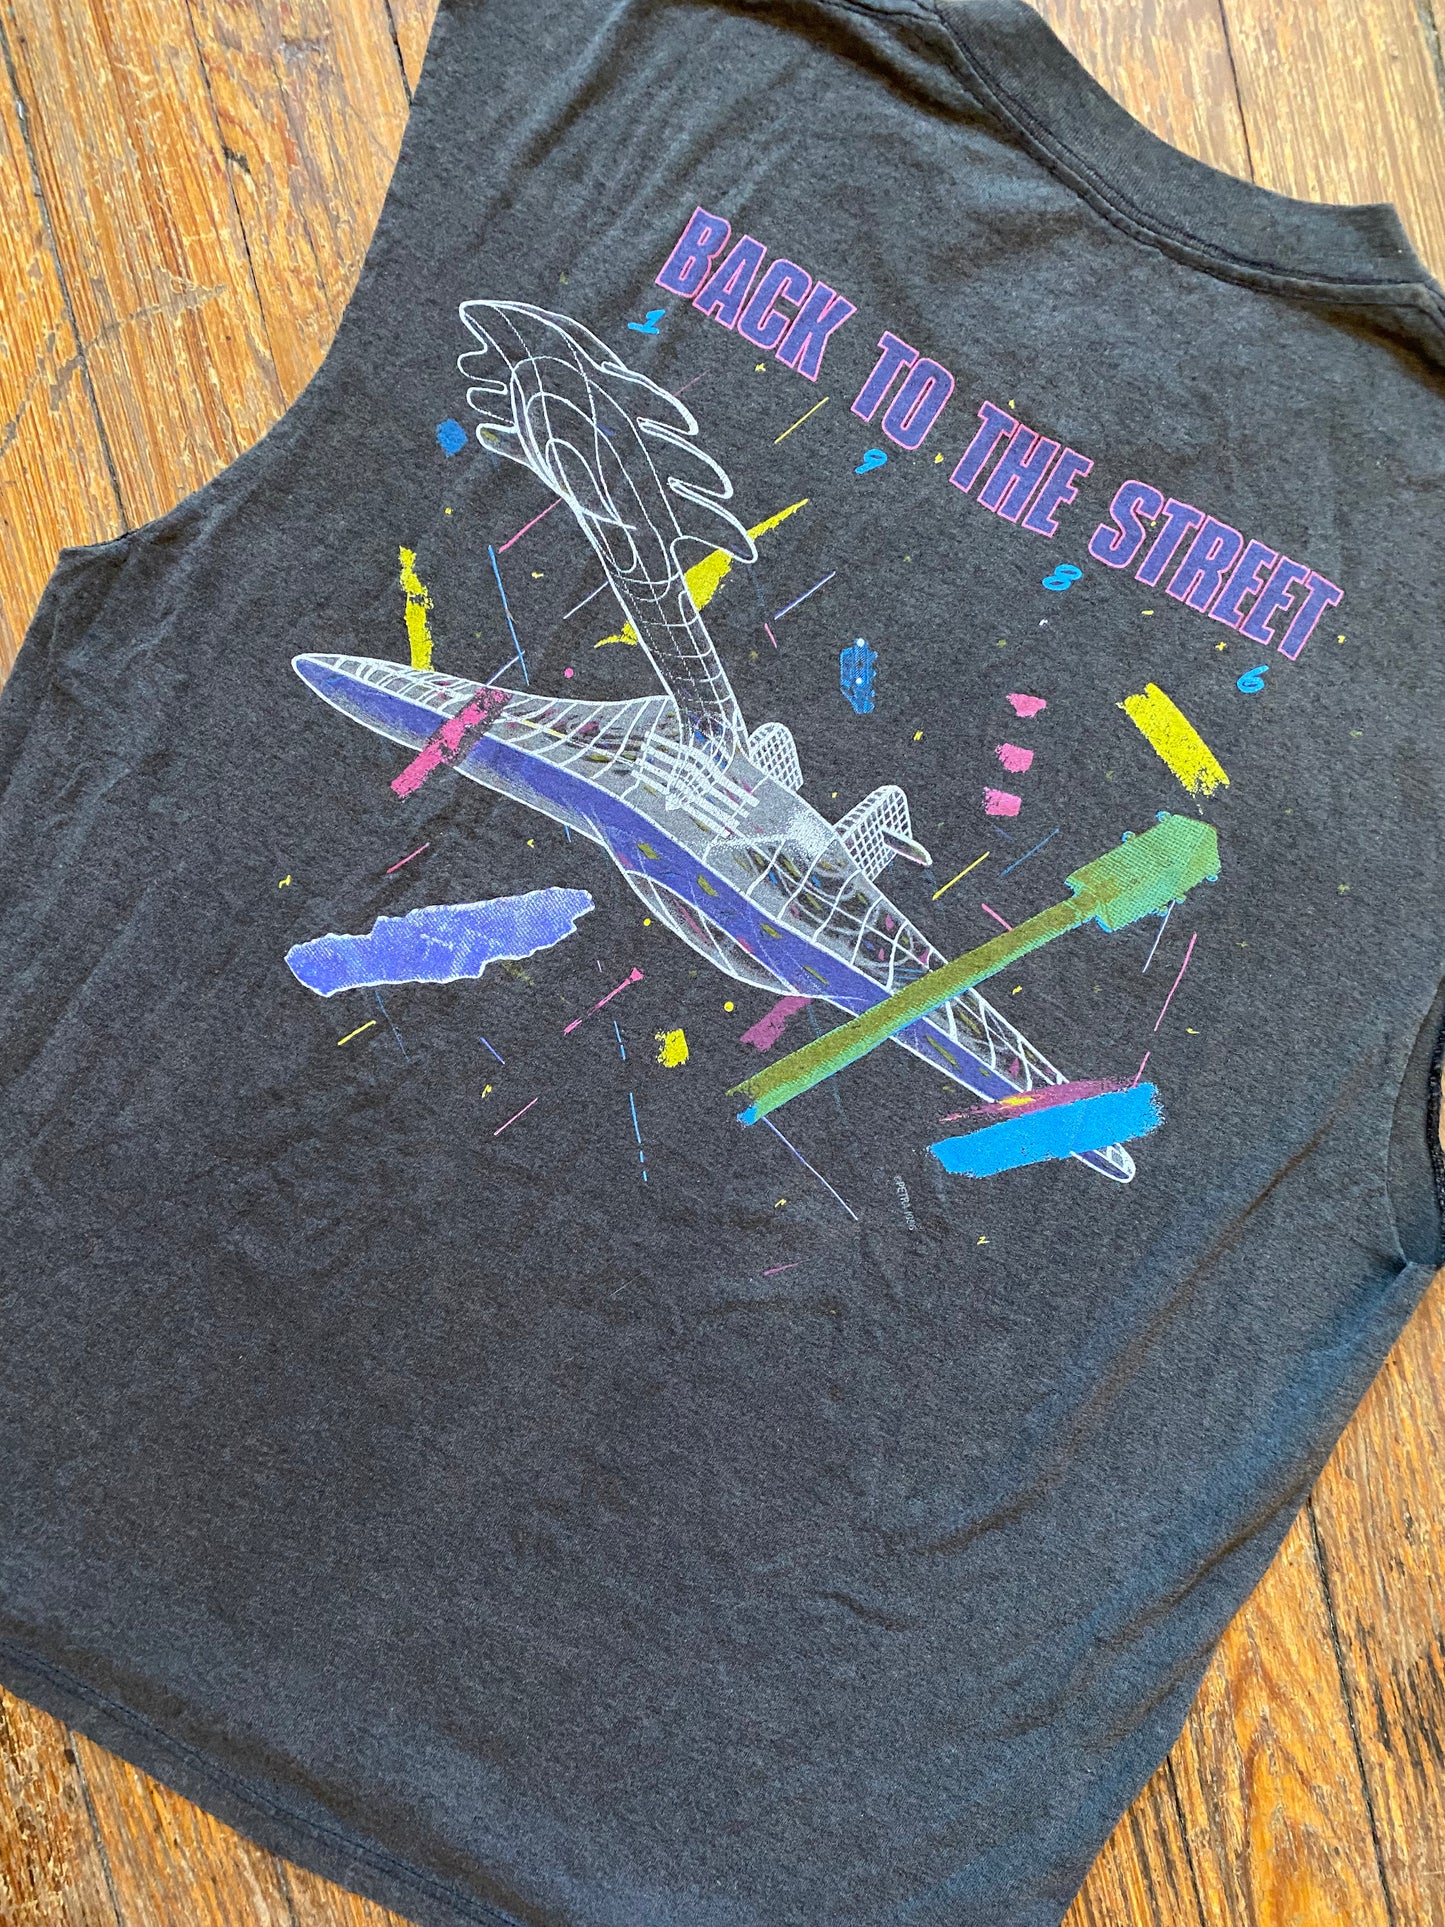 Vintage 1986 Petra “Back to the Street” Shirt